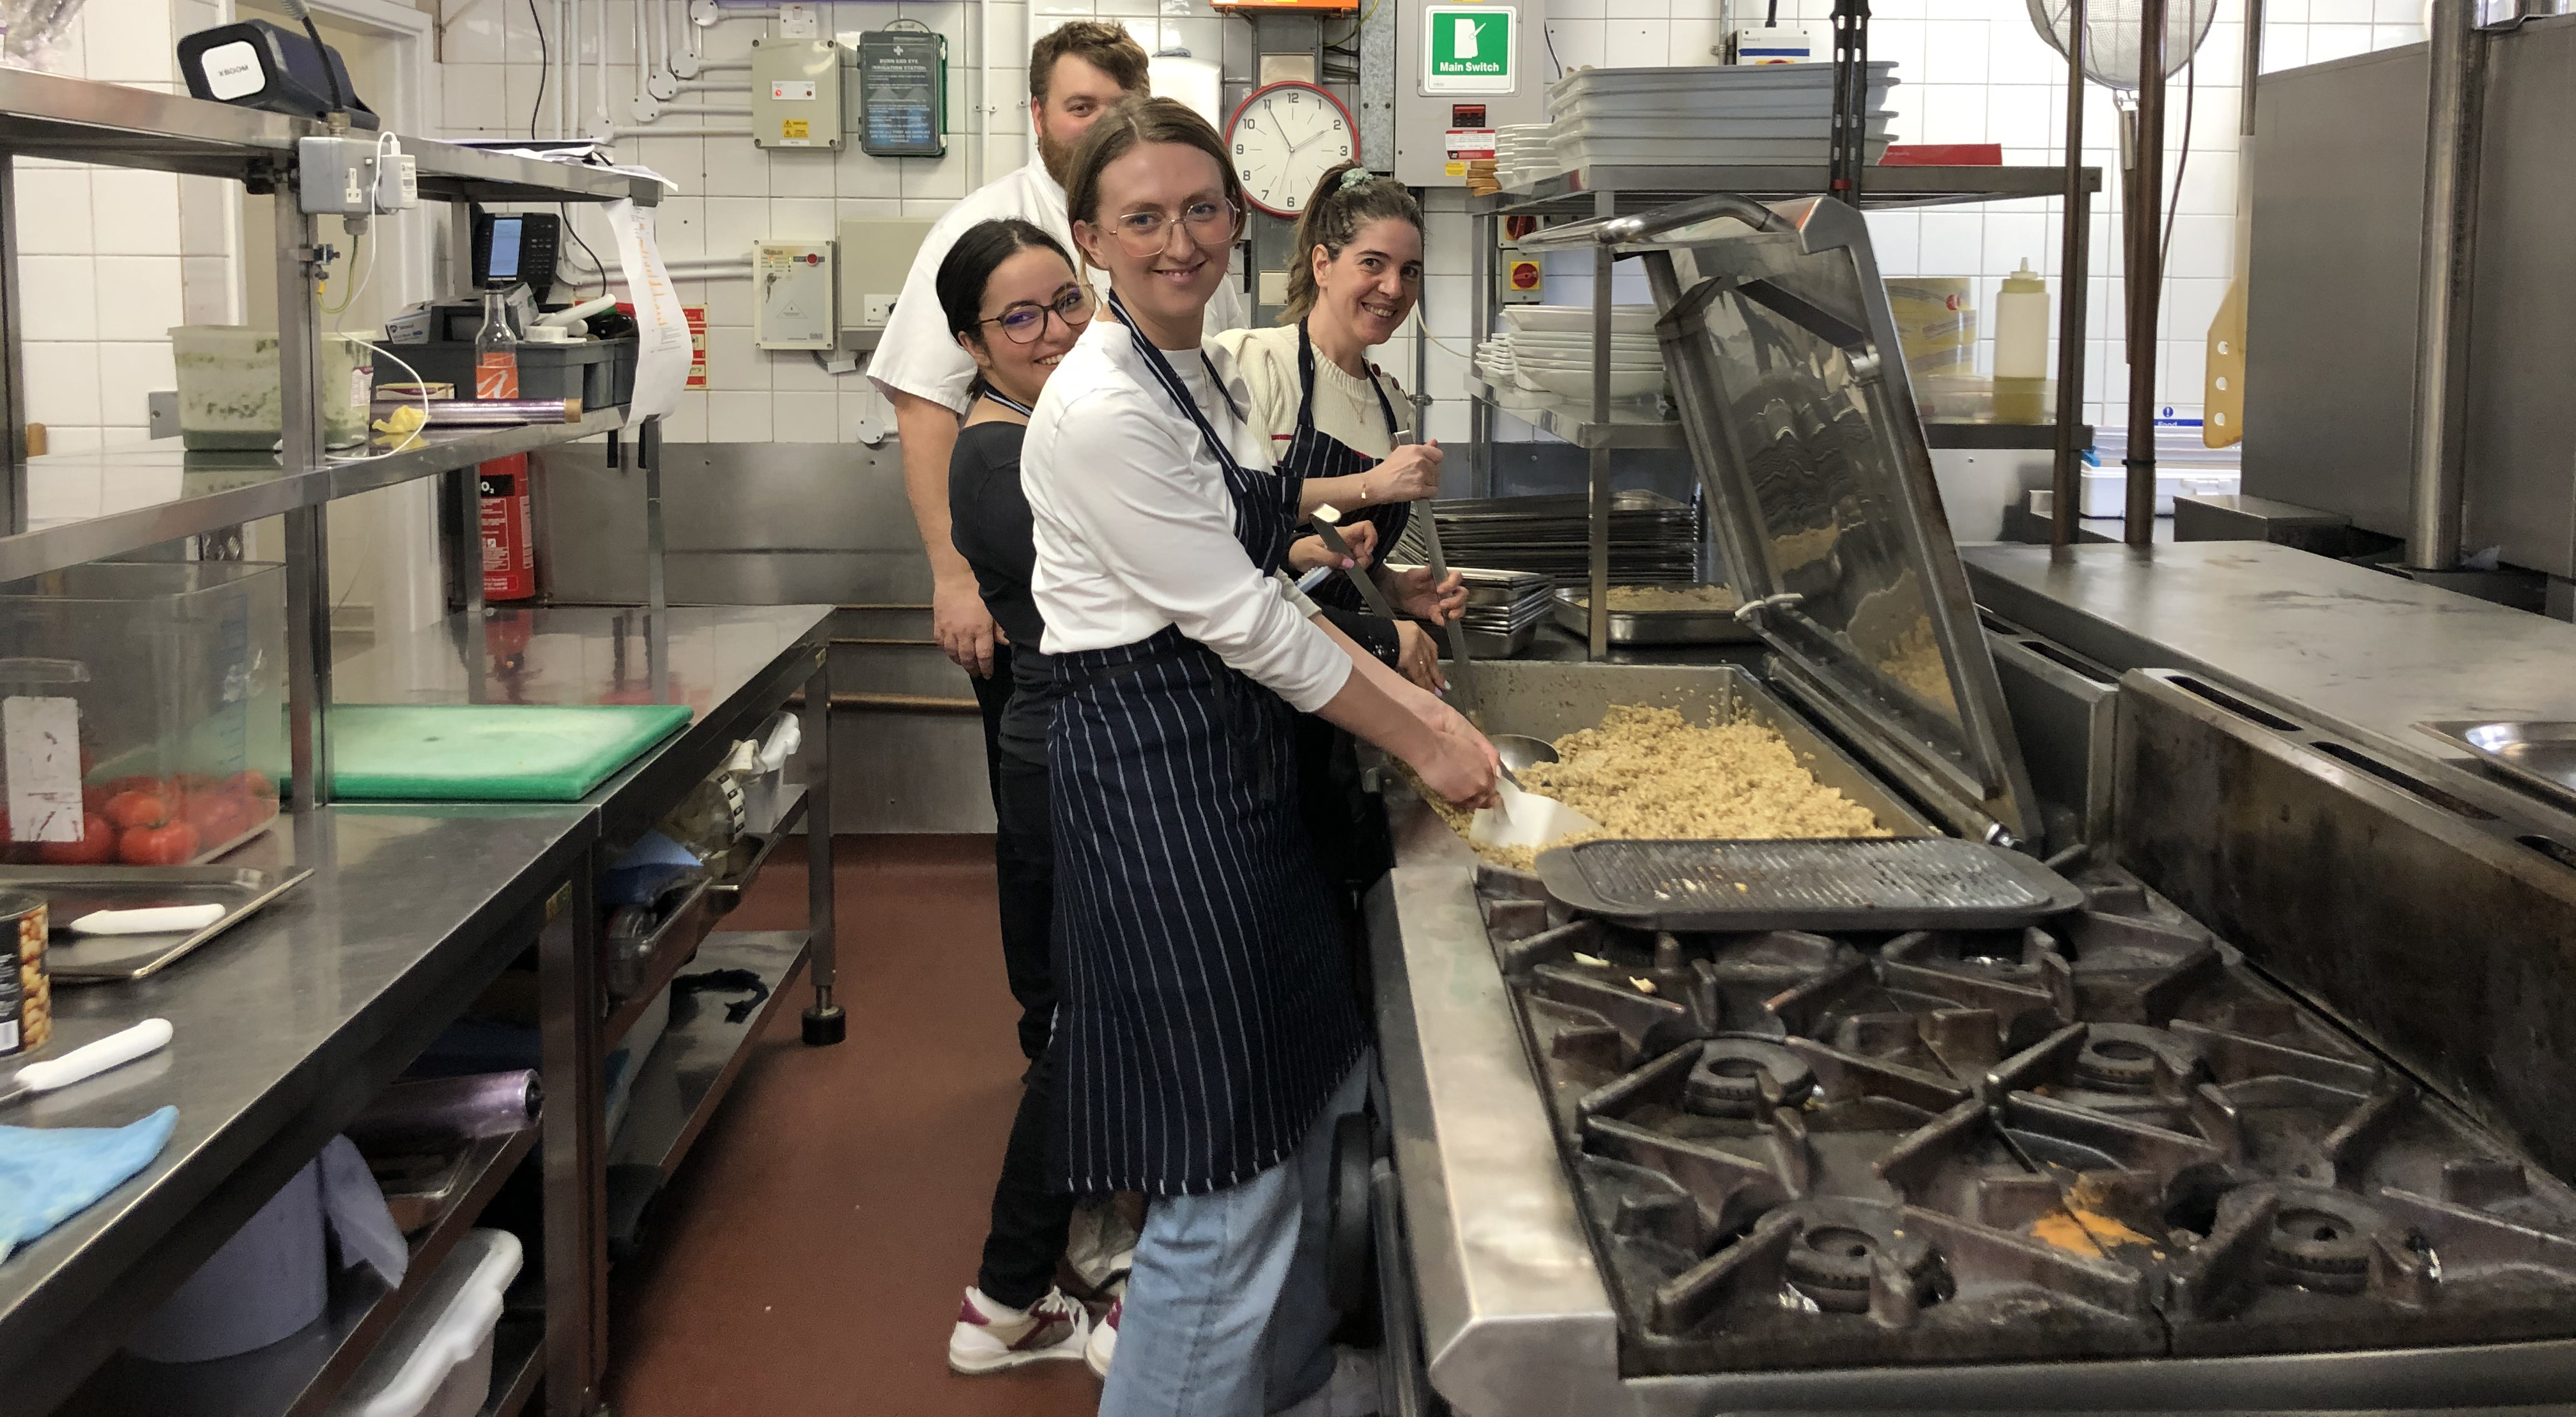 Above: Grub’s up! – Ankorstore’s (front to back) Lucy Clarke, Chama Saddiqi and Rita Tavares with chef Michael Jelley behind the scenes in the Business Design Centre’s kitchens